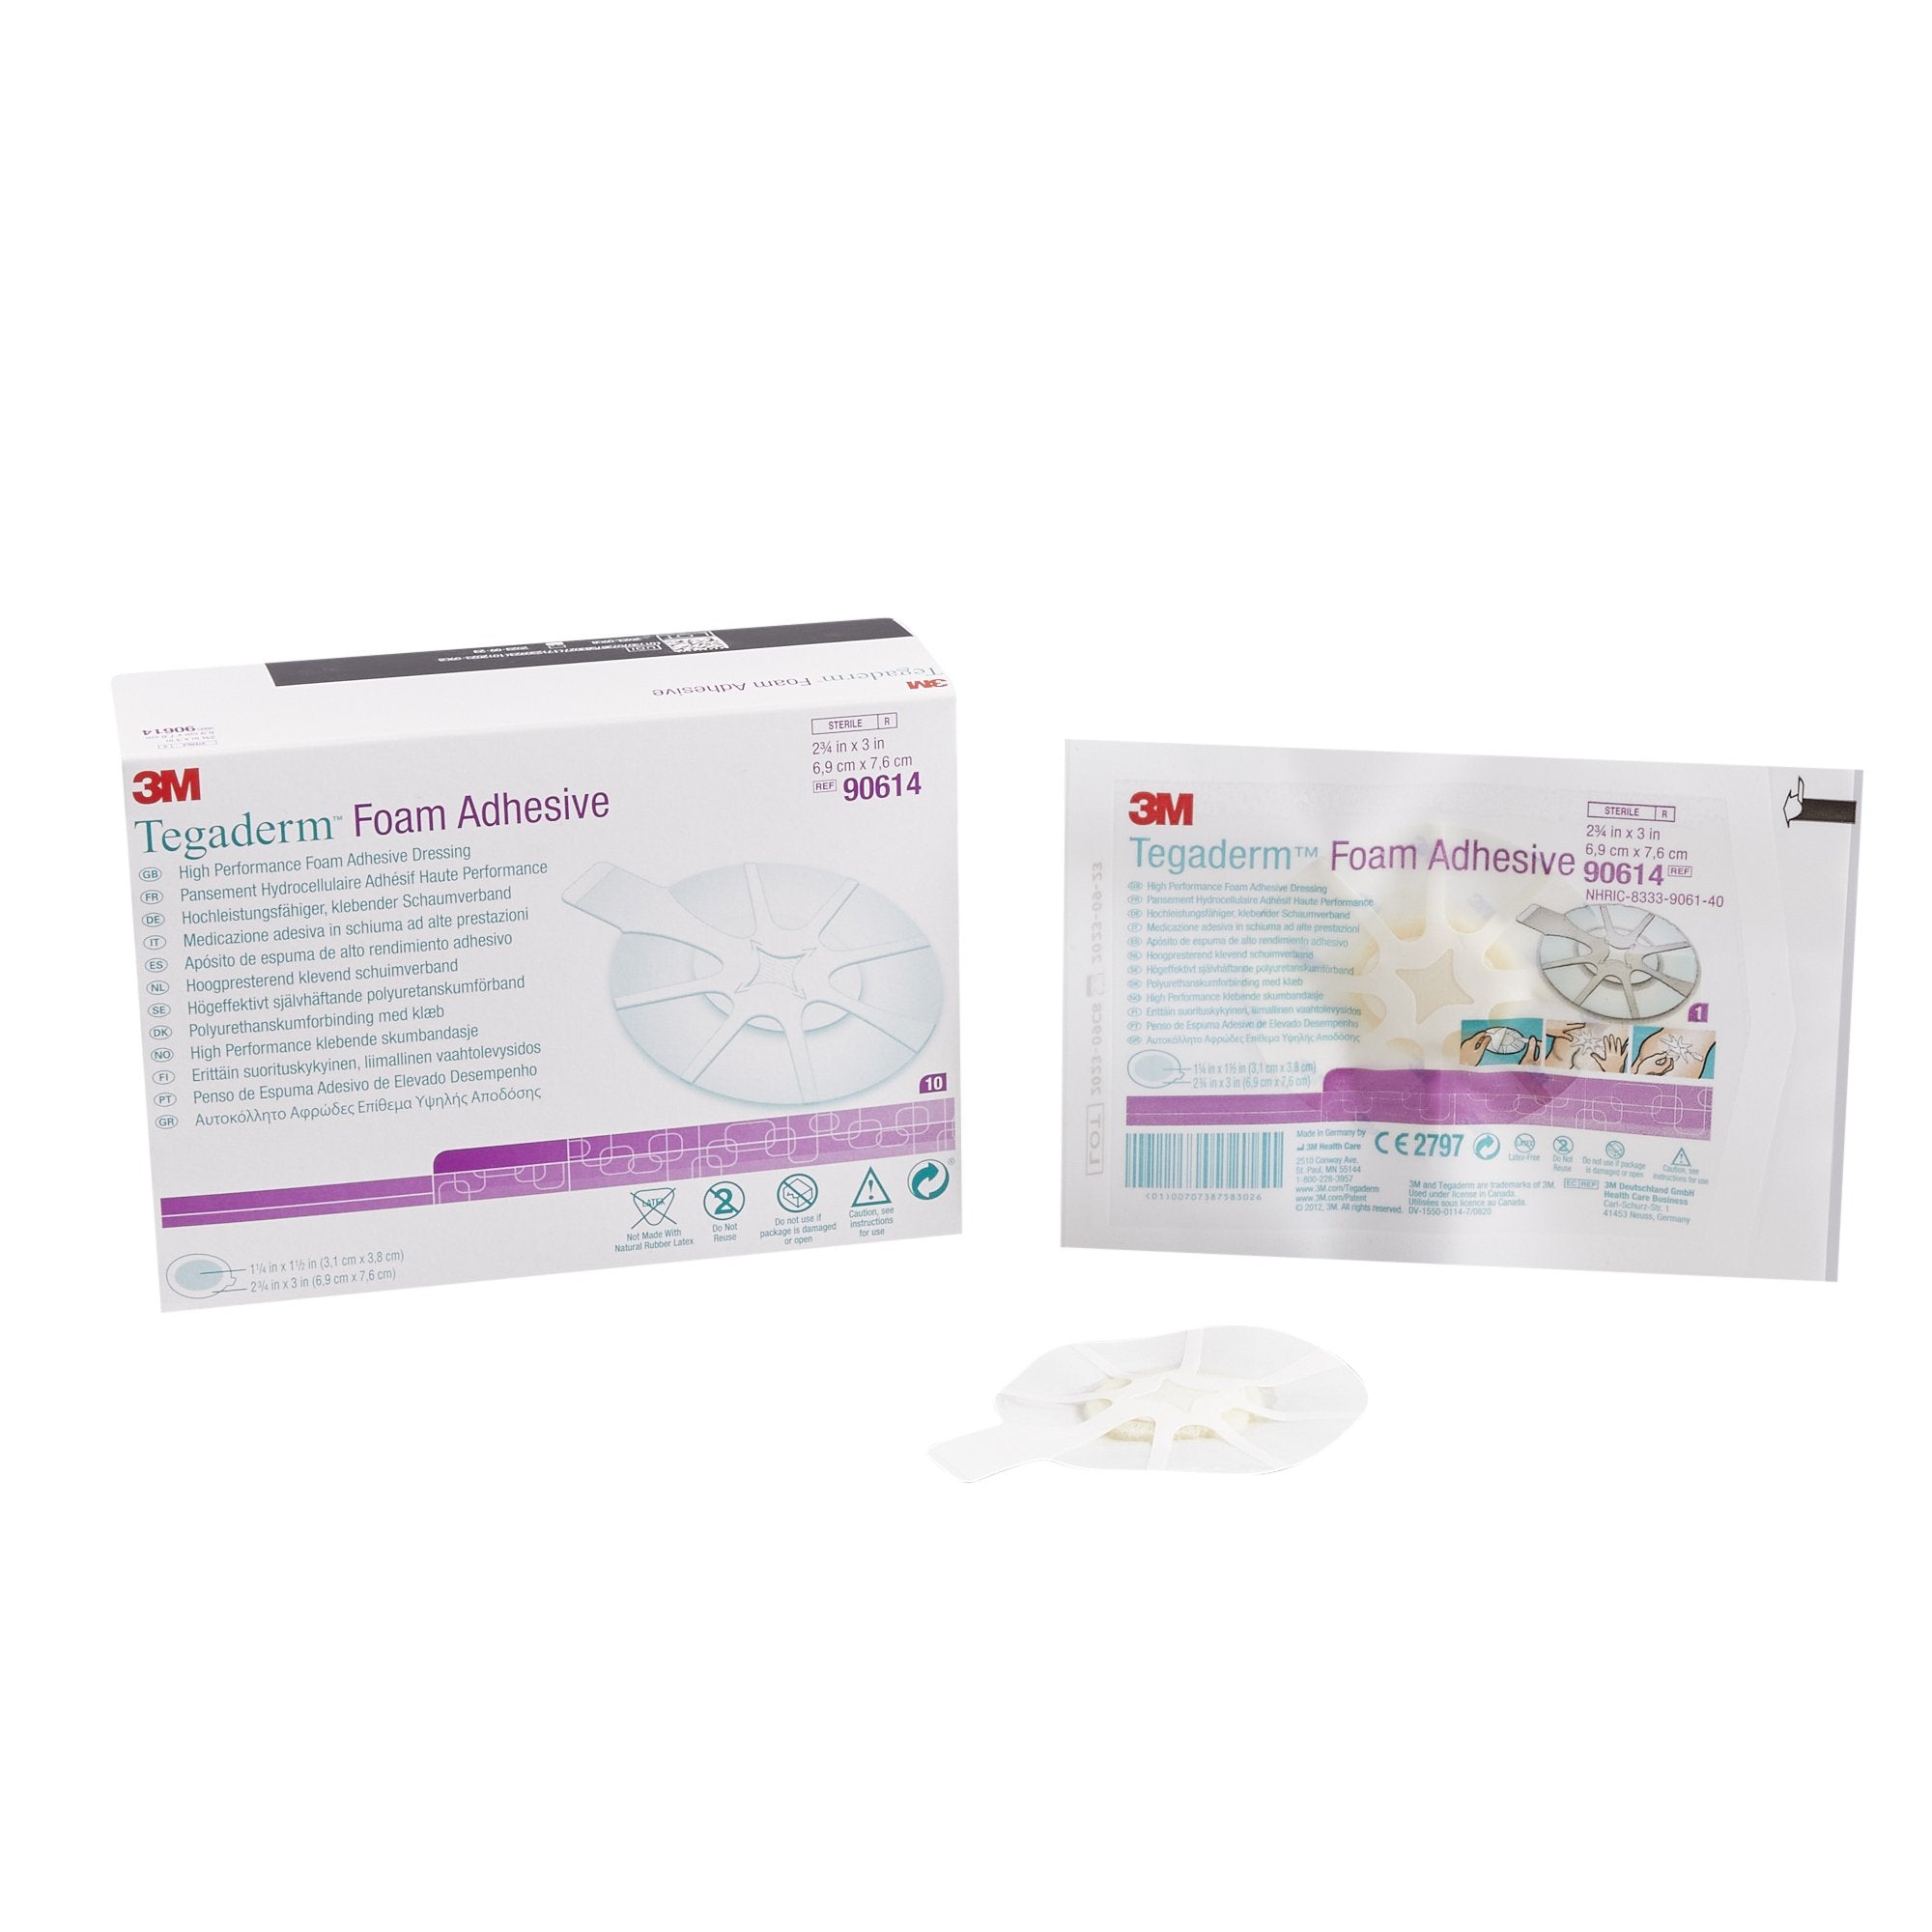 Foam Dressing 3M™ Tegaderm™ High Performance 2-3/4 X 2-3/4 Inch With Border Film Backing Acrylic Adhesive Oval Sterile